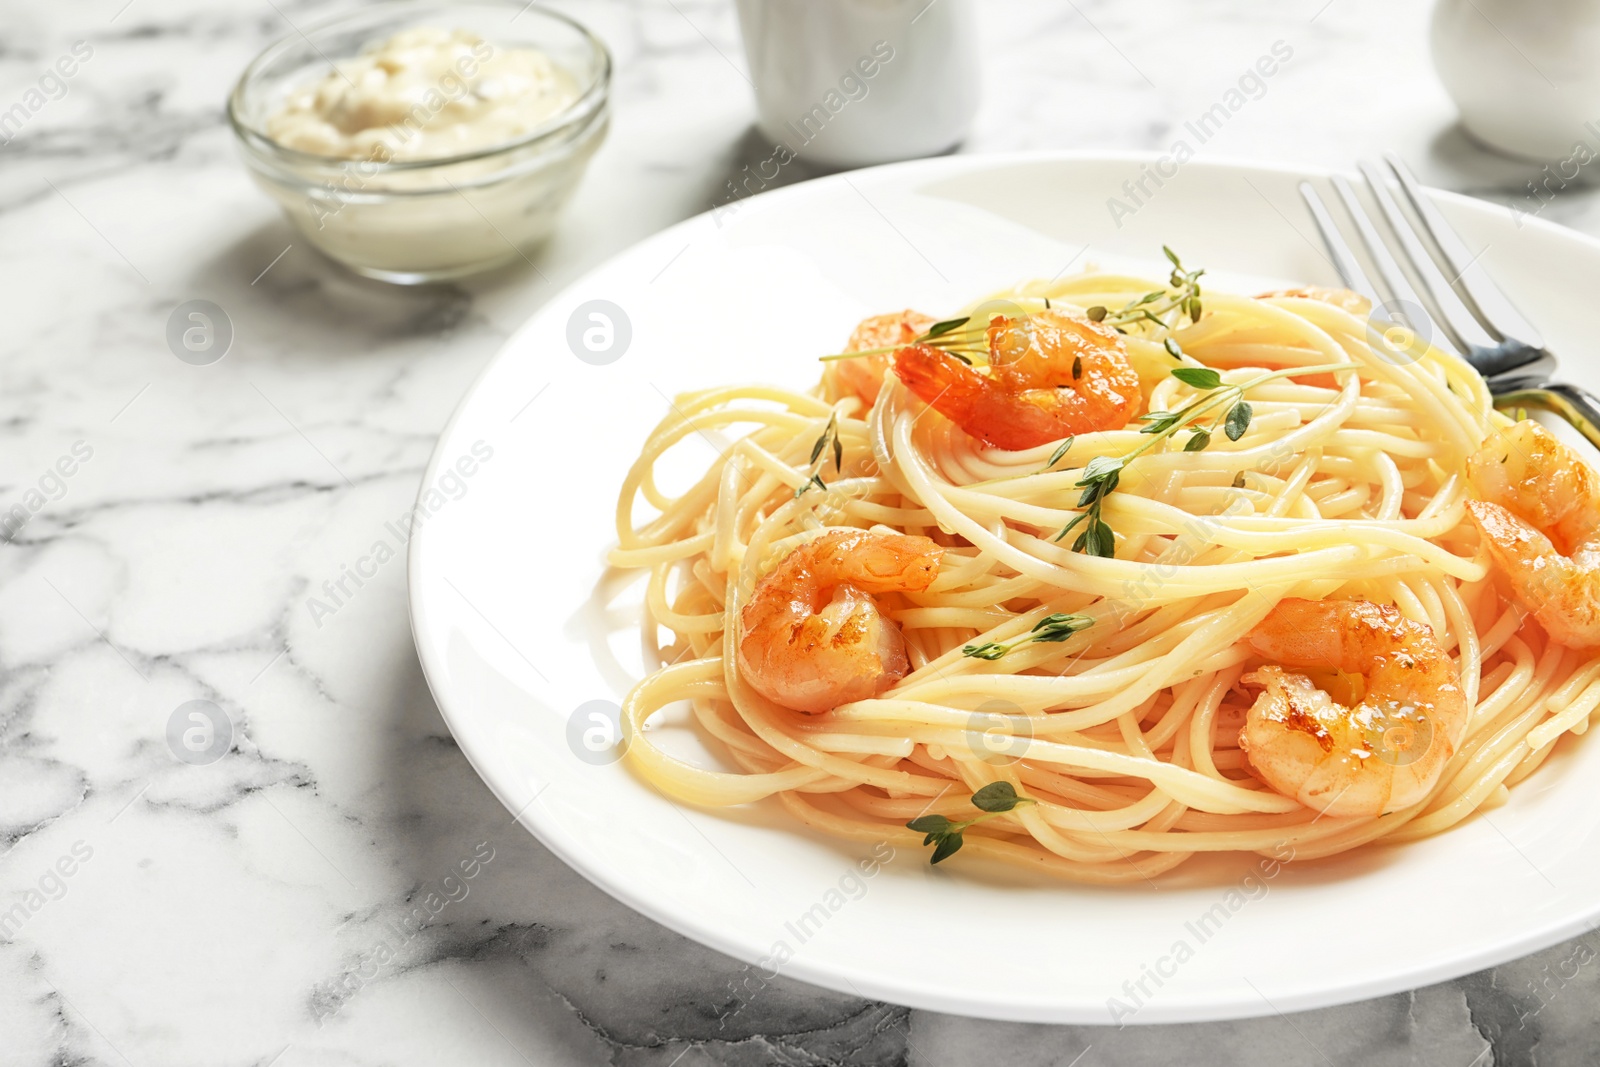 Photo of Plate with spaghetti and shrimps on table